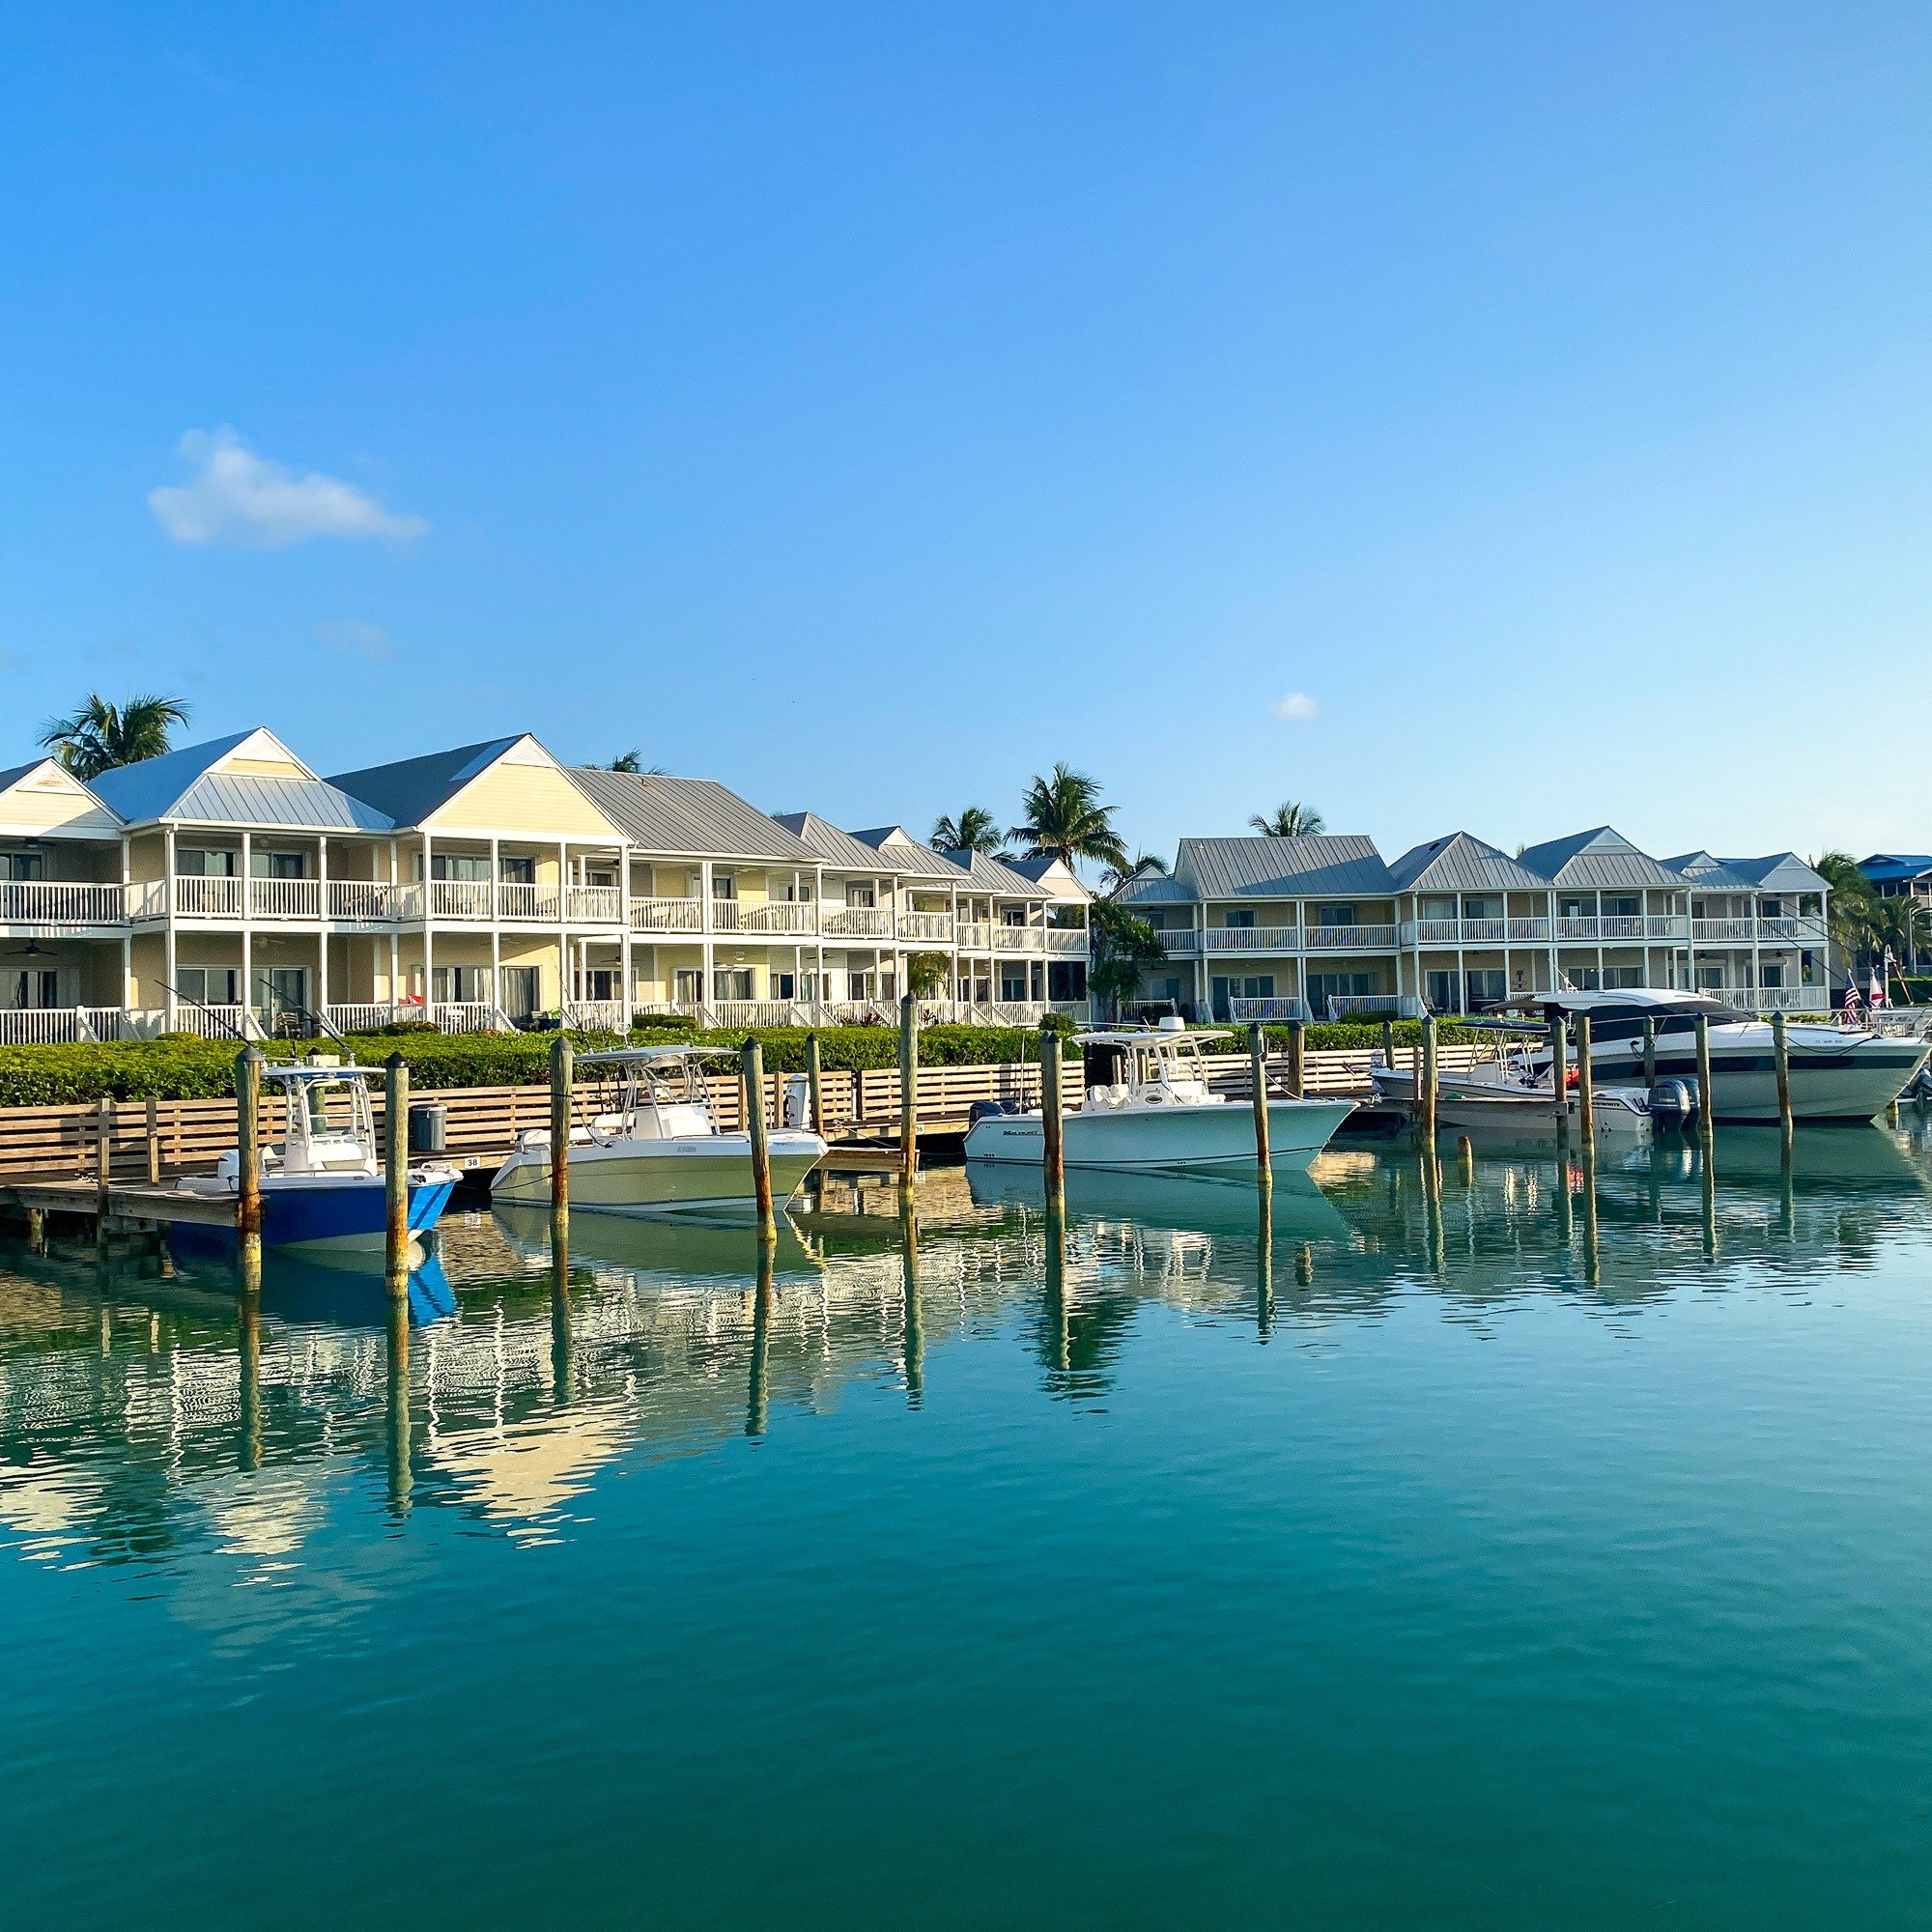 Things to Do at Hawks Cay Resort | 21 Family Activities